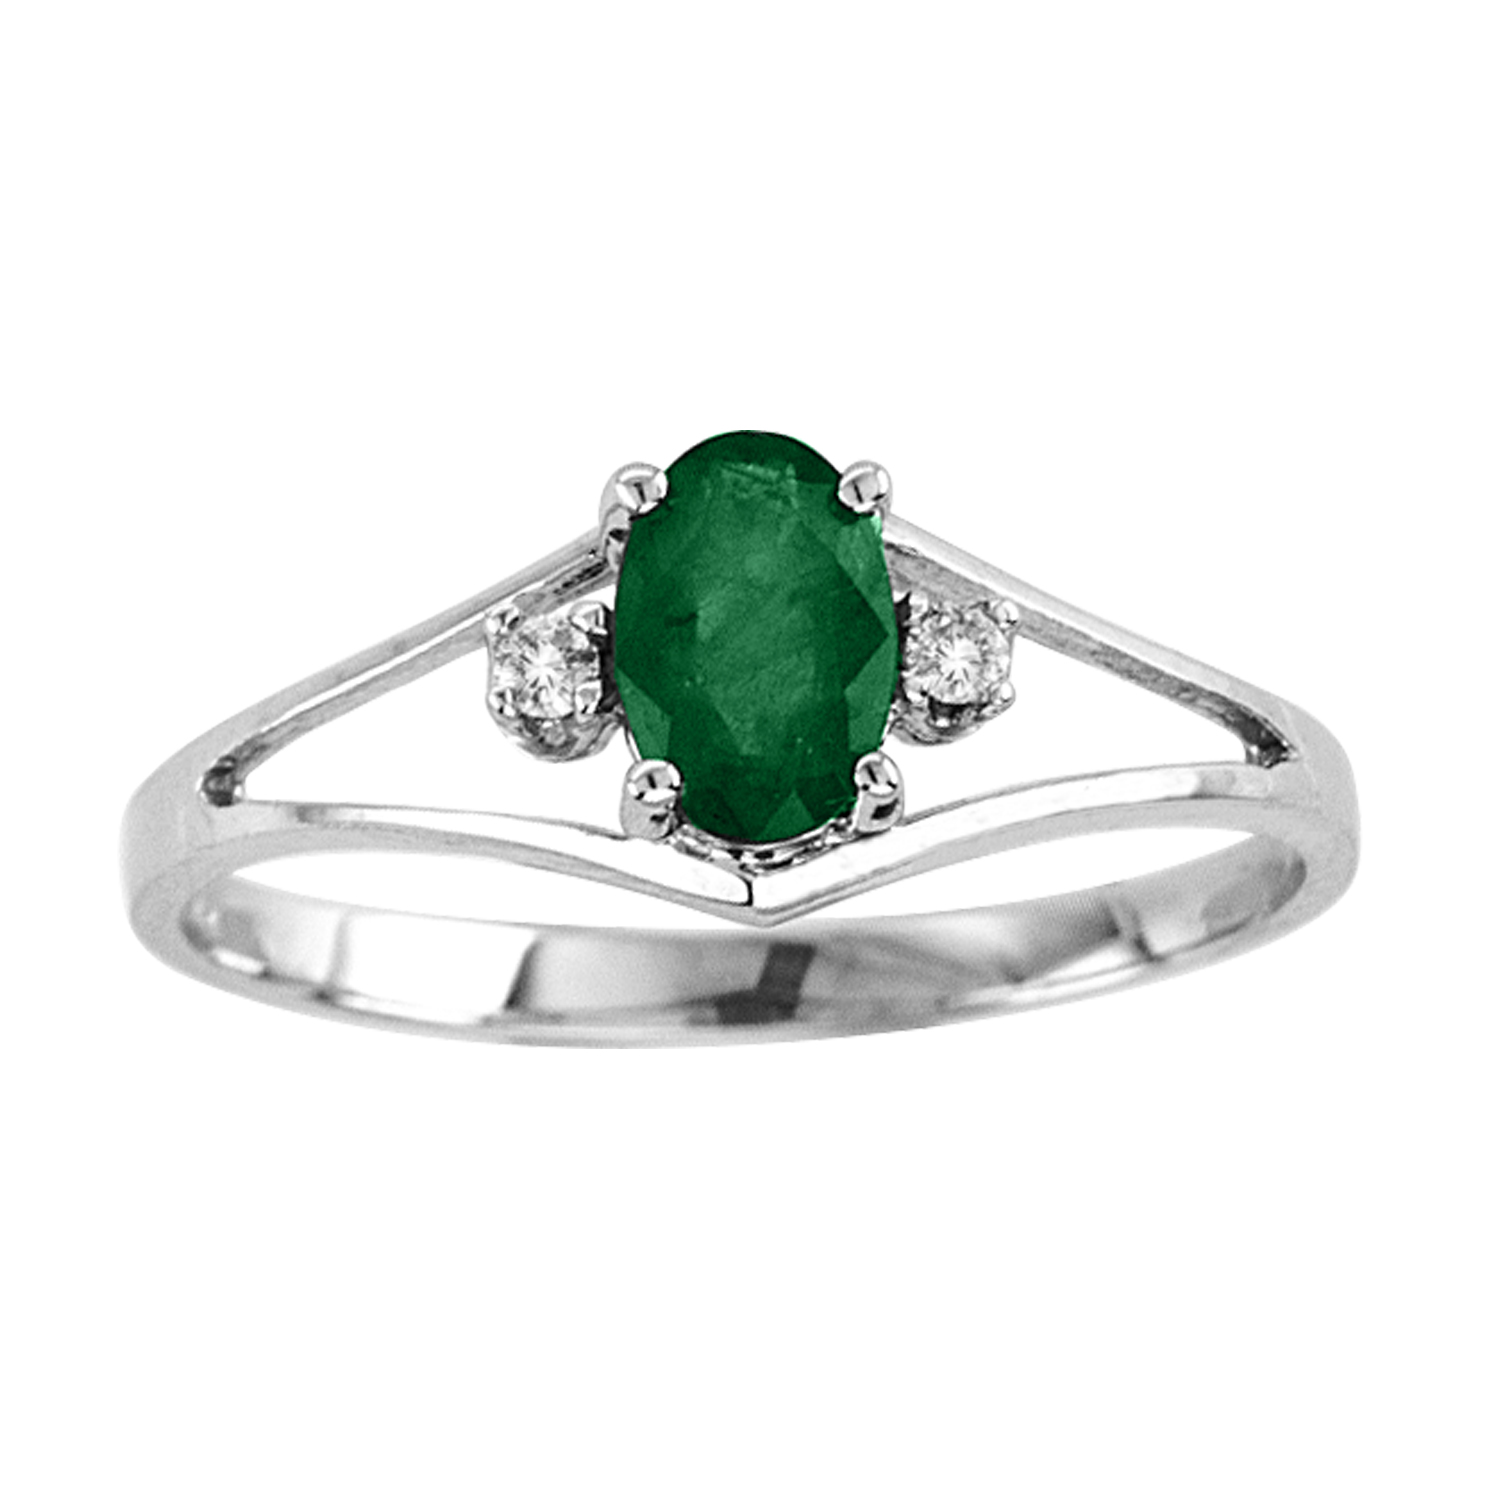 Oval Emerald and Diamond ring set in 14k Gold